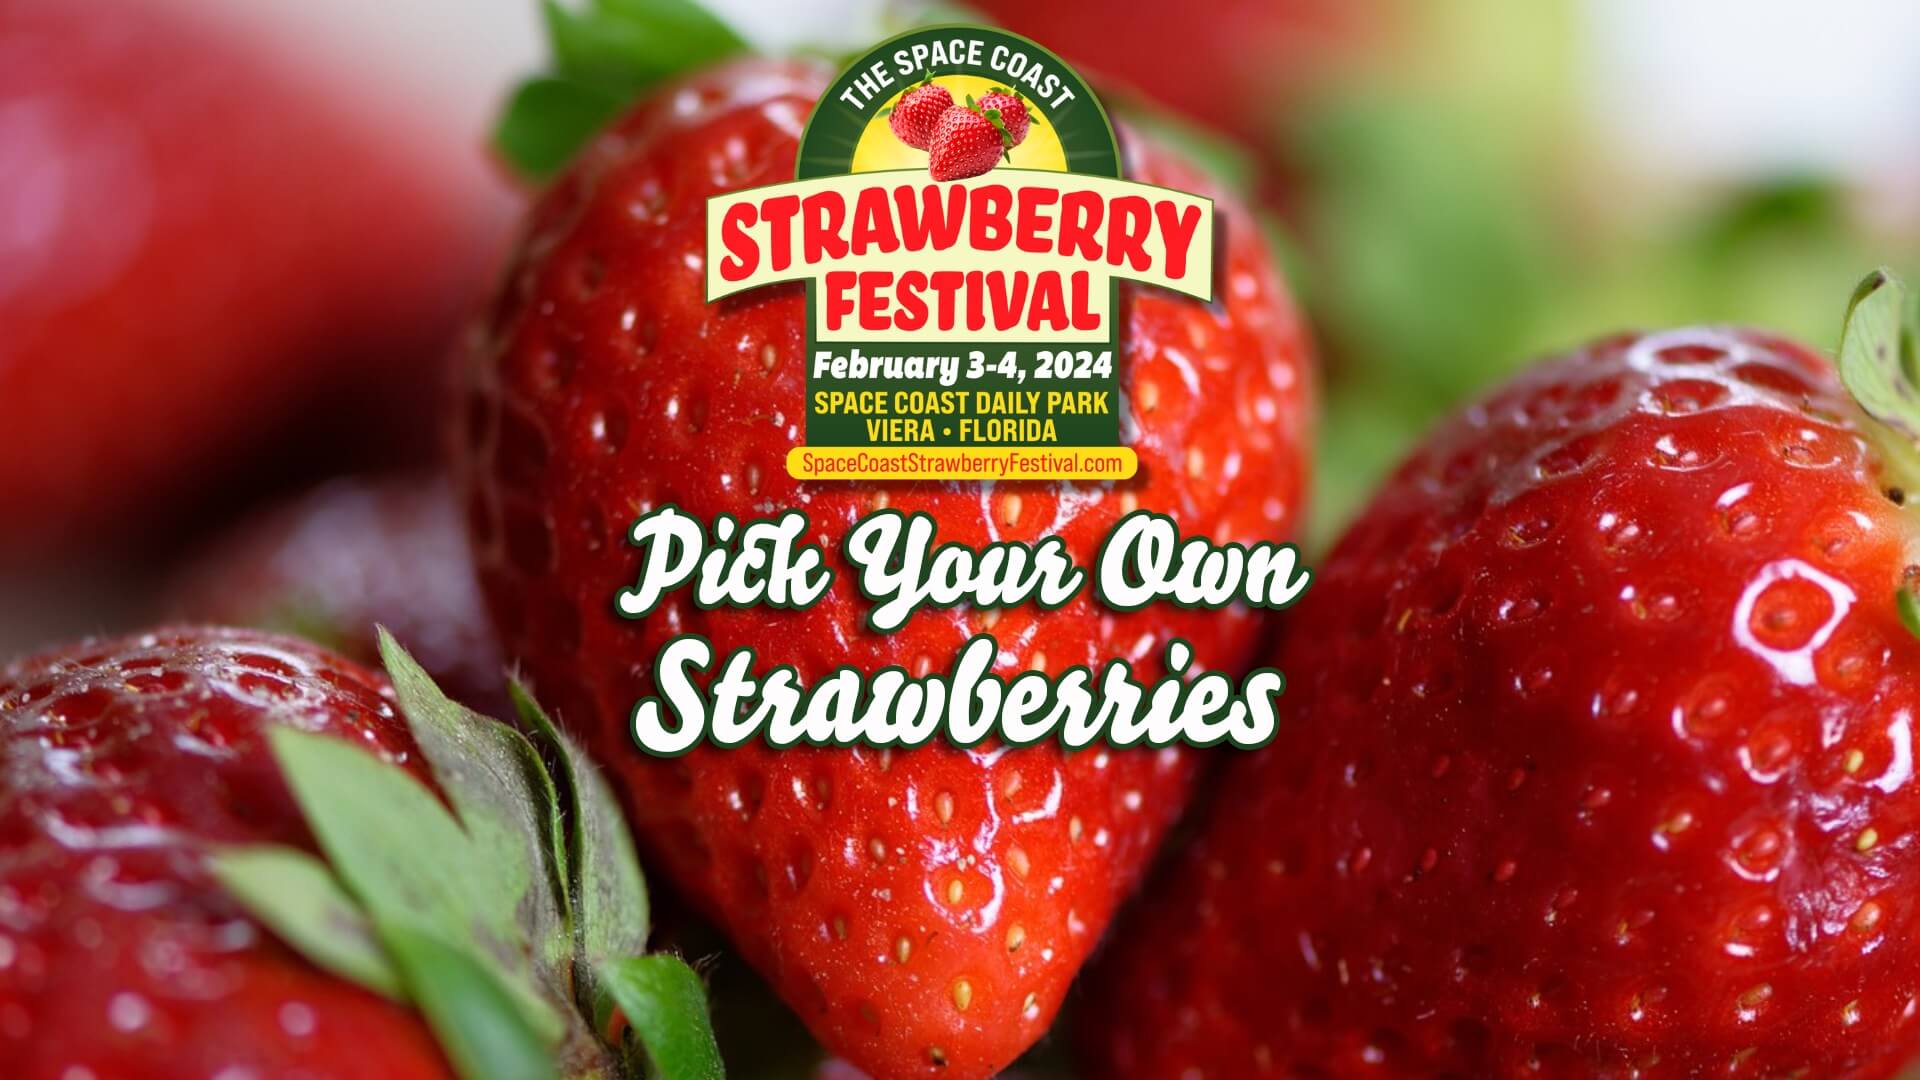 The Space Coast Strawberry Festival 2024 promotional flyer